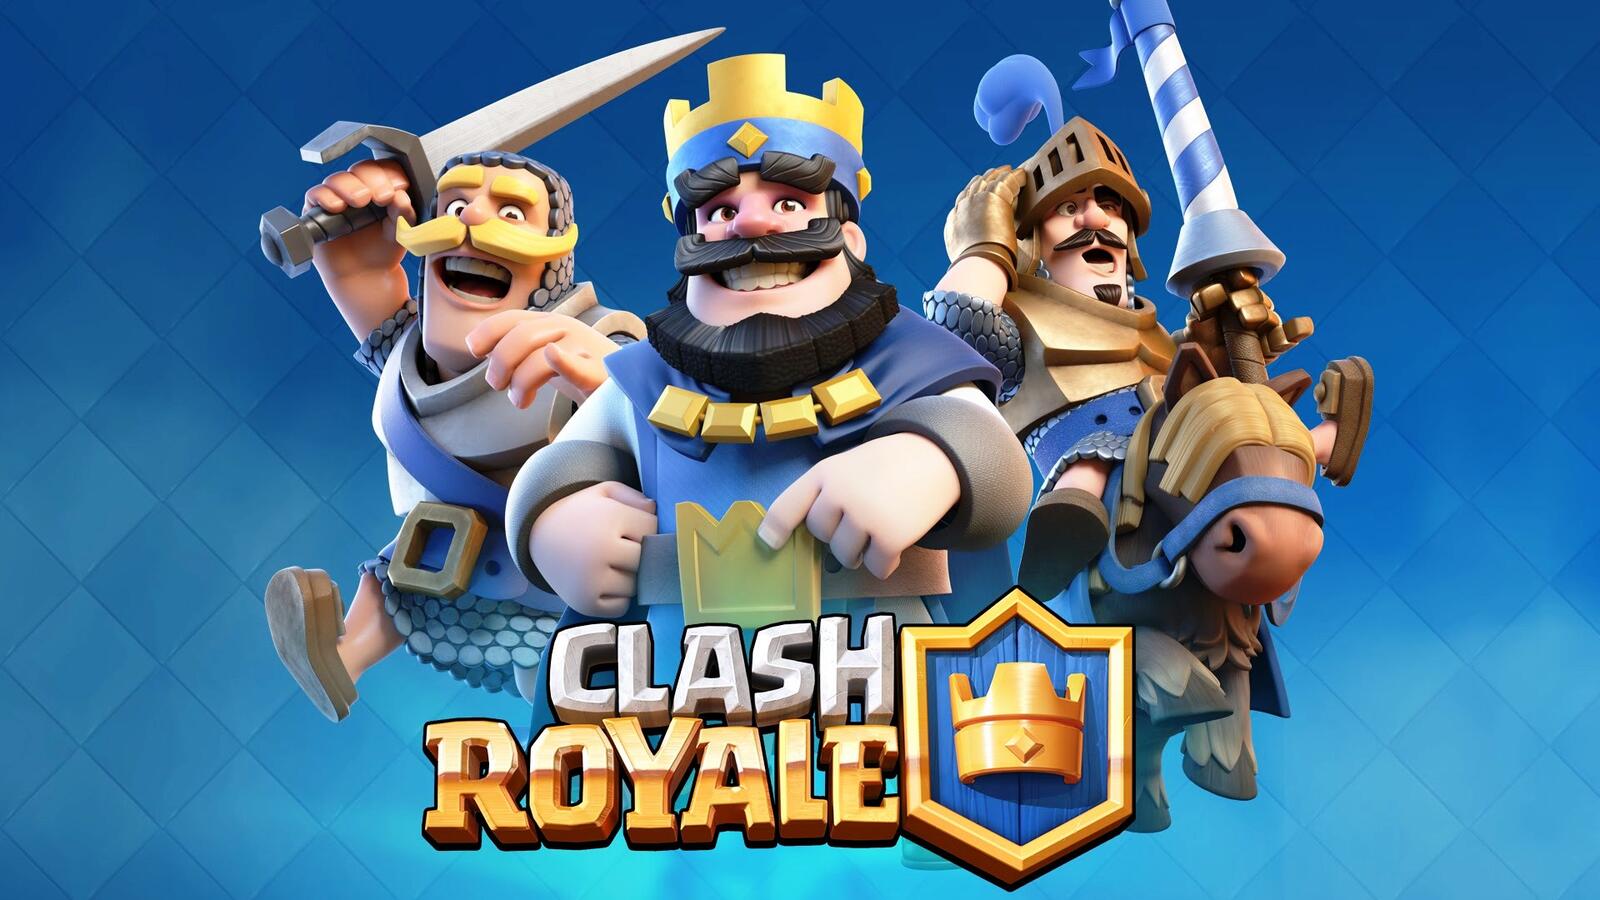 Wallpapers games 2016 games clash royale on the desktop